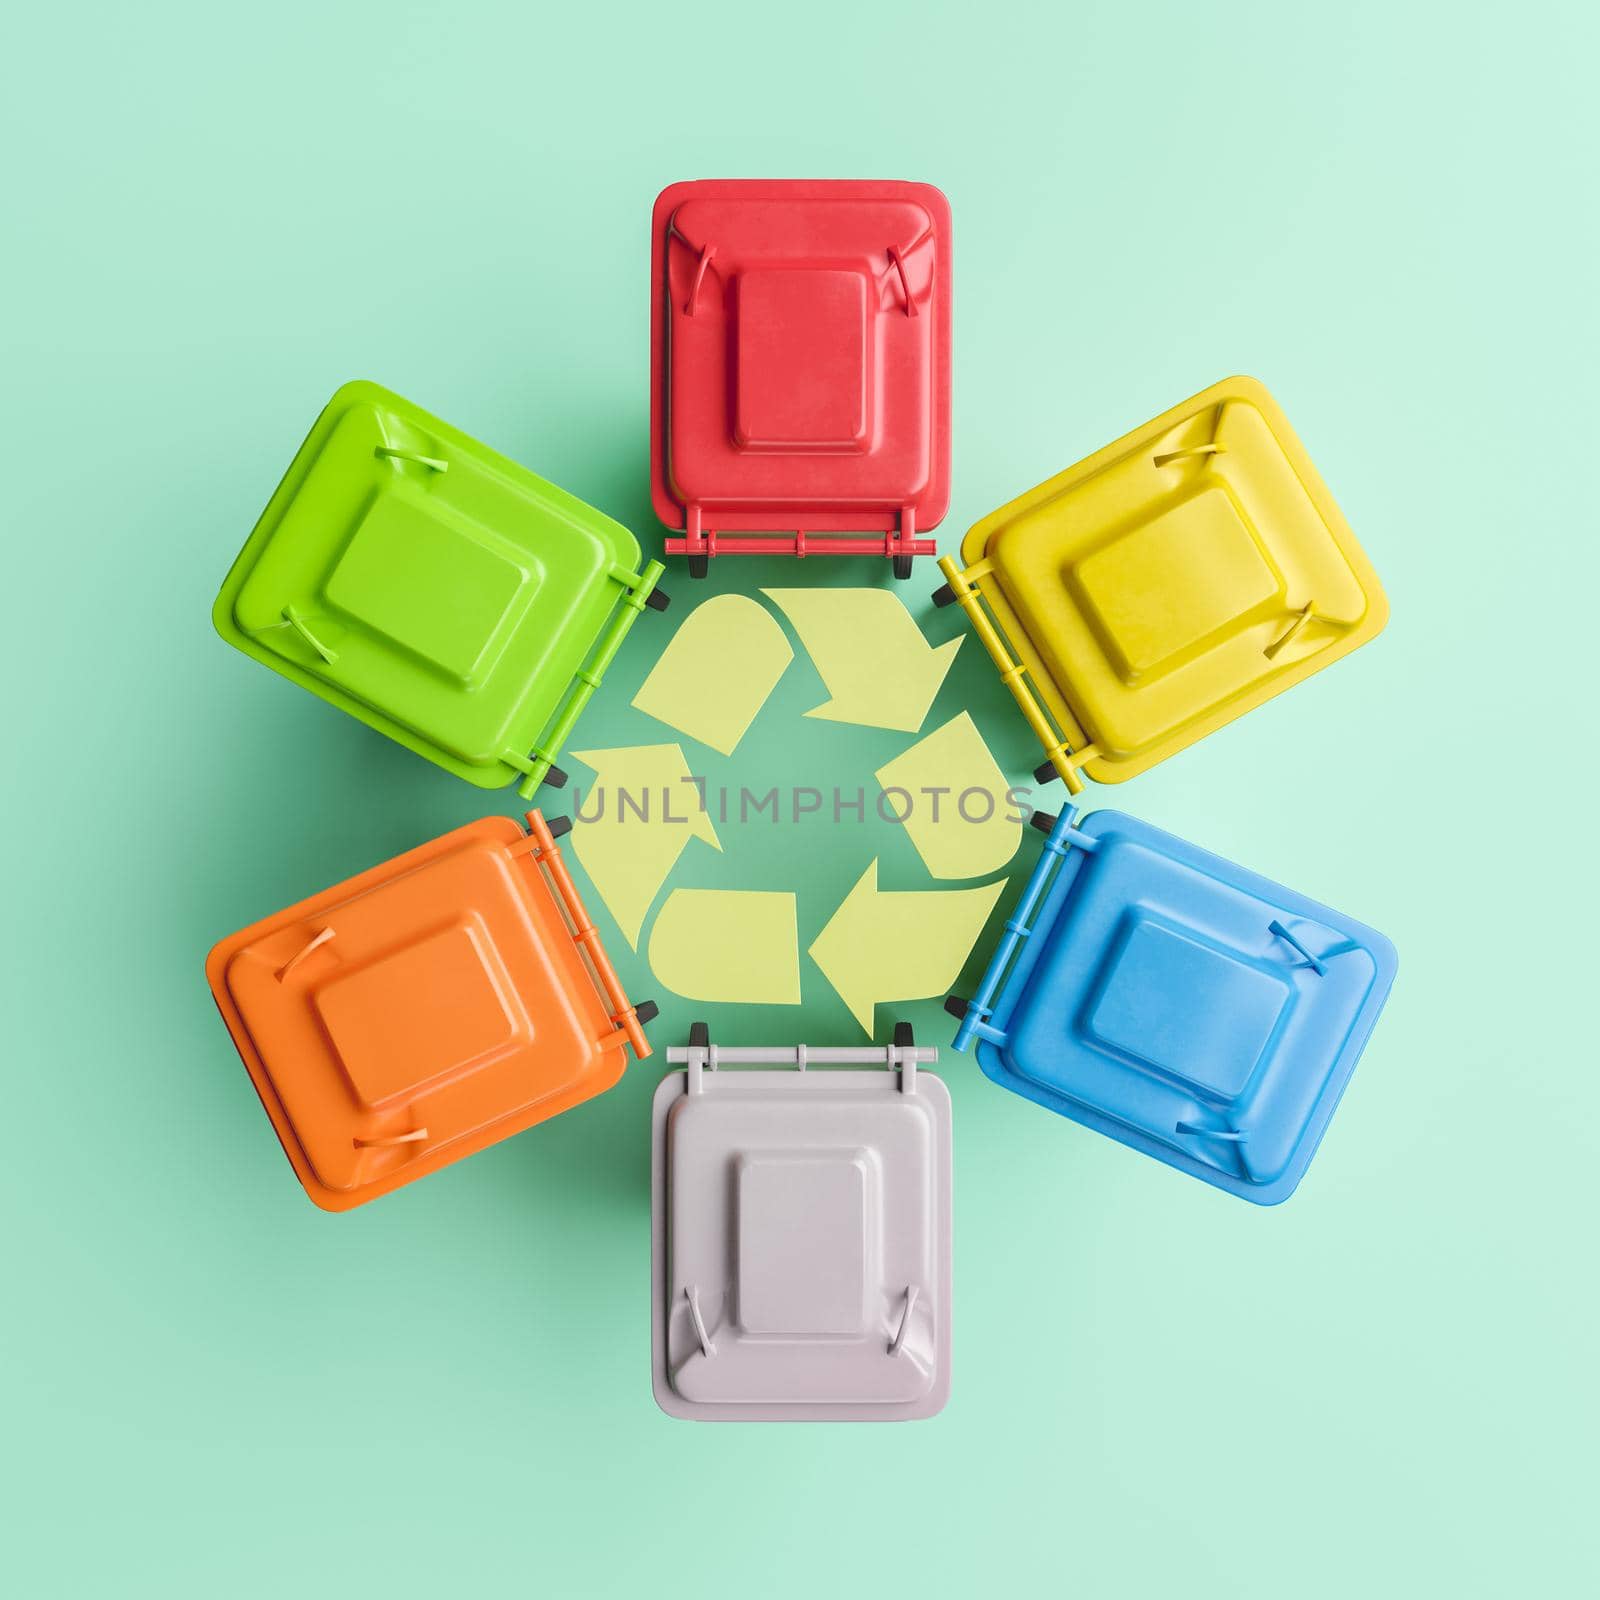 Top view 3D illustration of many colorful bins arranged in circle around recycle symbol on mint background